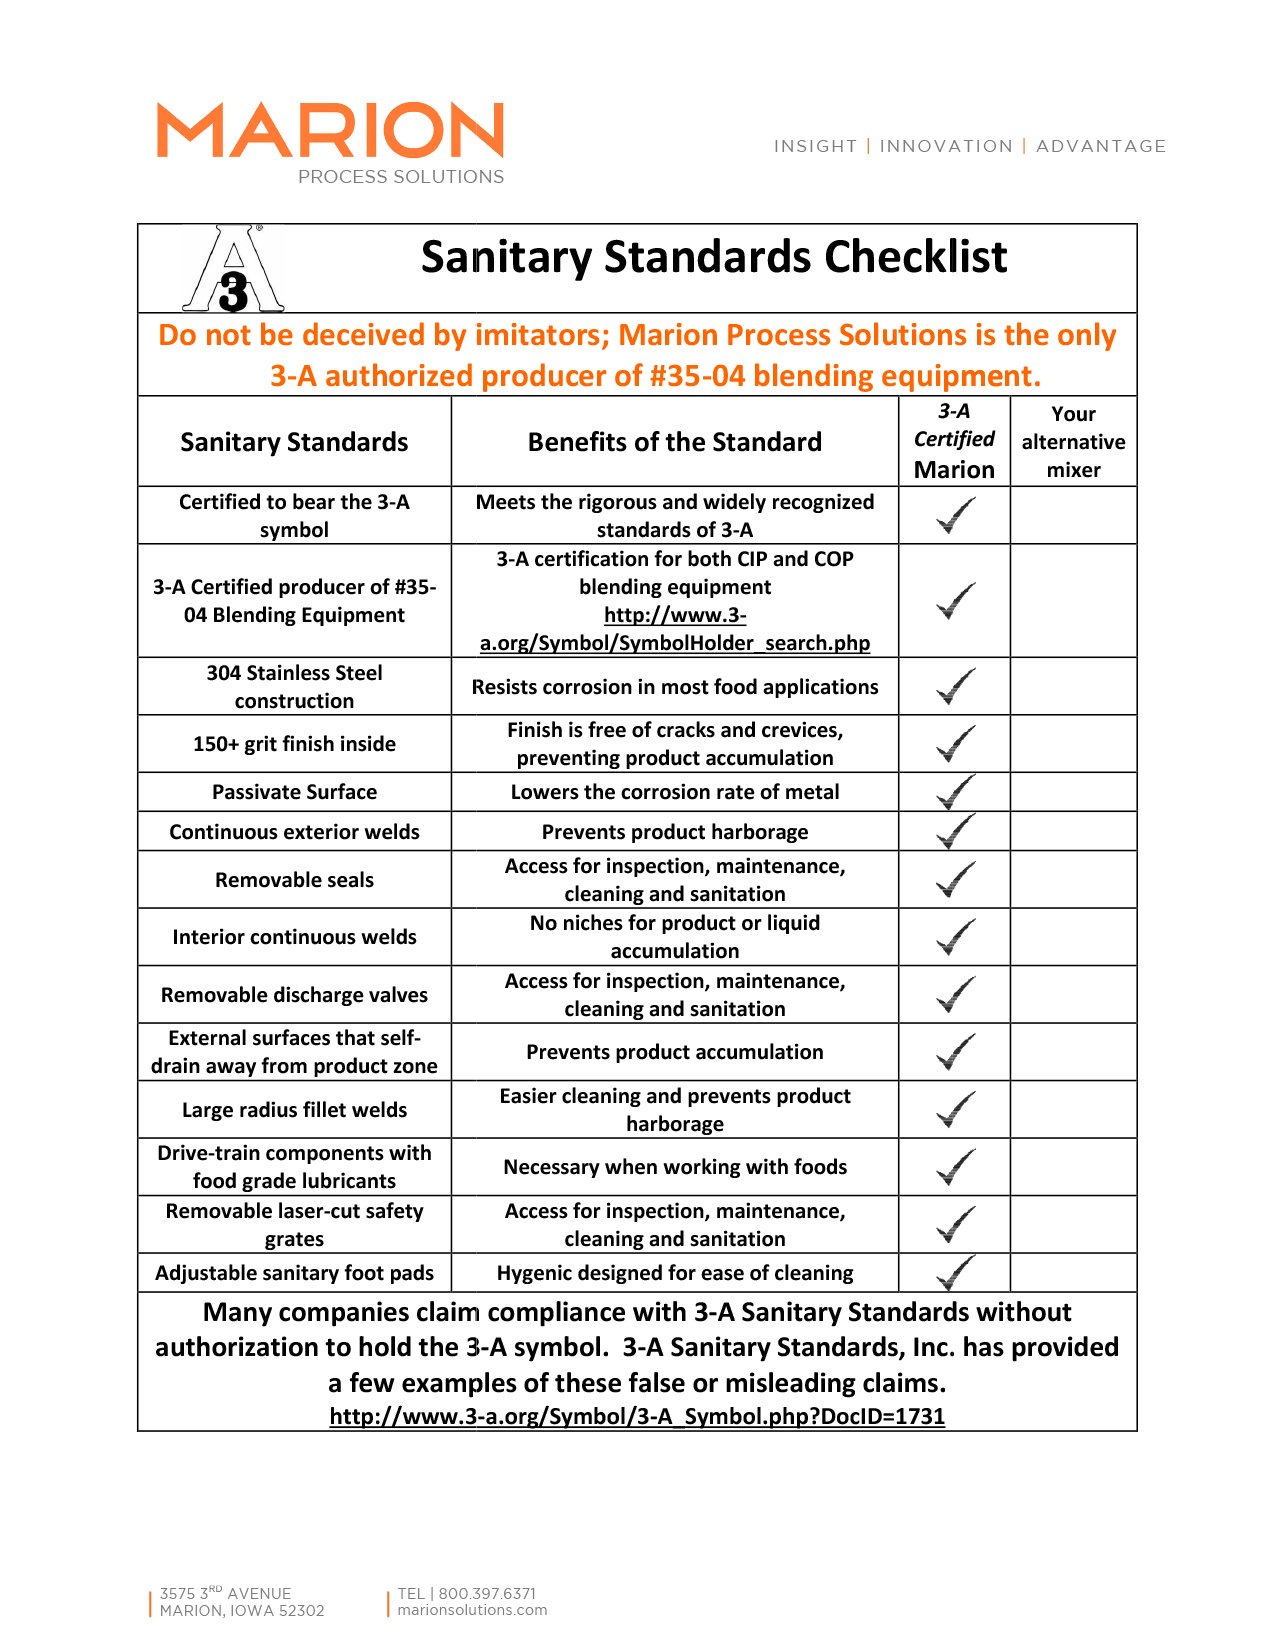 Making the Grade in Sanitary Standards | 3-A Sanitary Standards